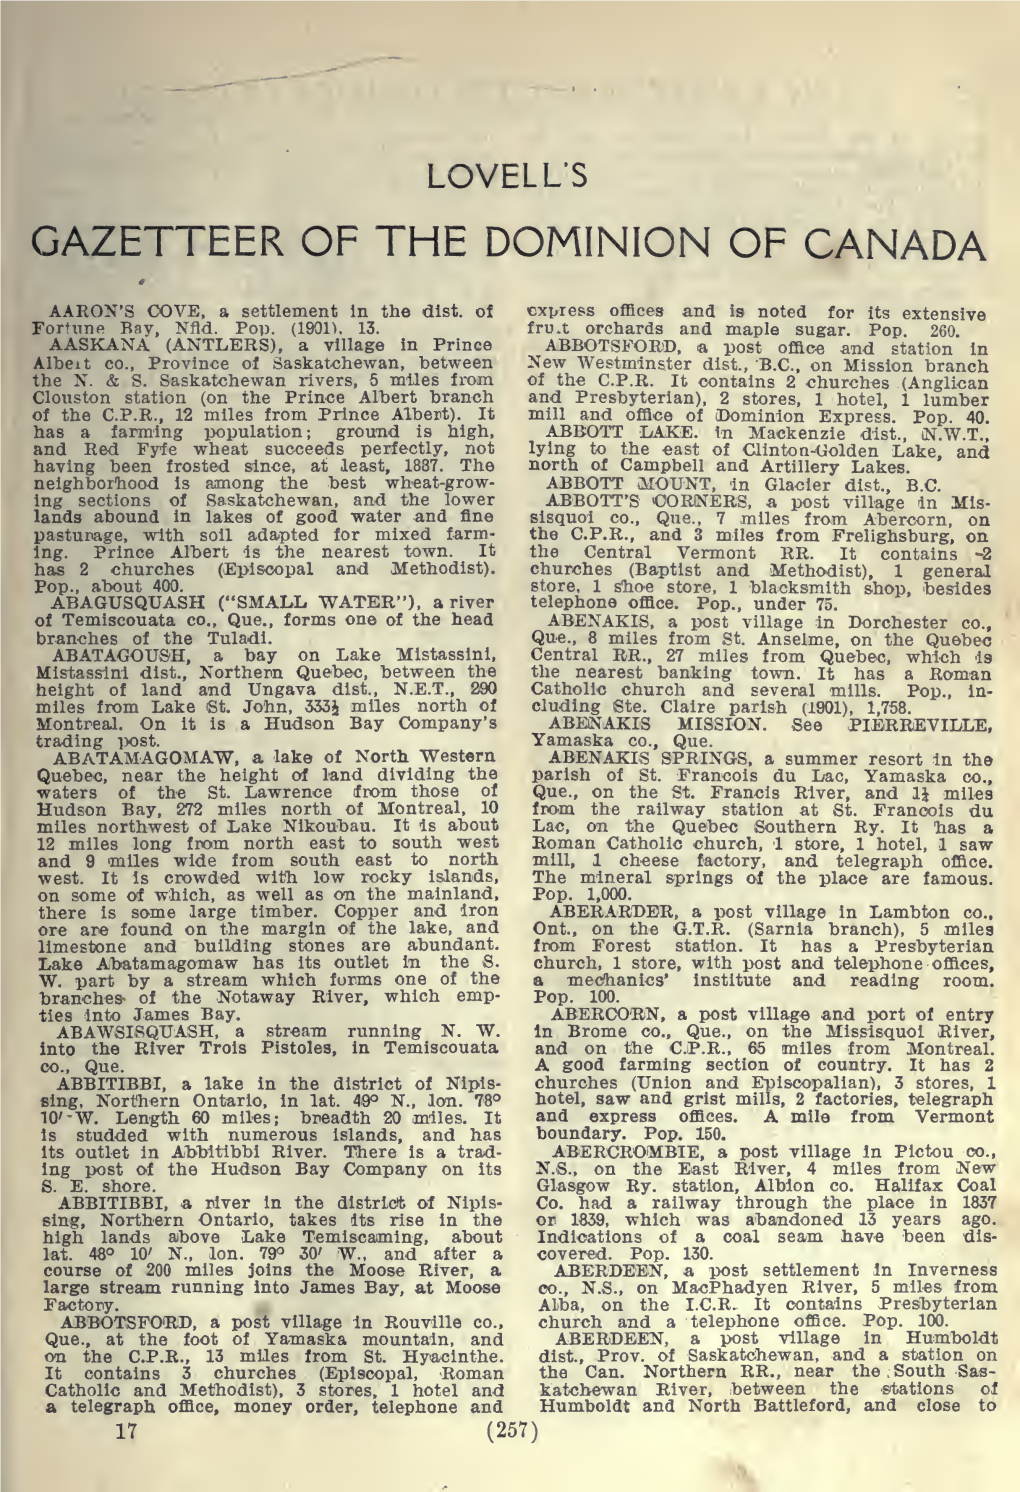 Lovell's Gazetteer of the Dominion of Canada